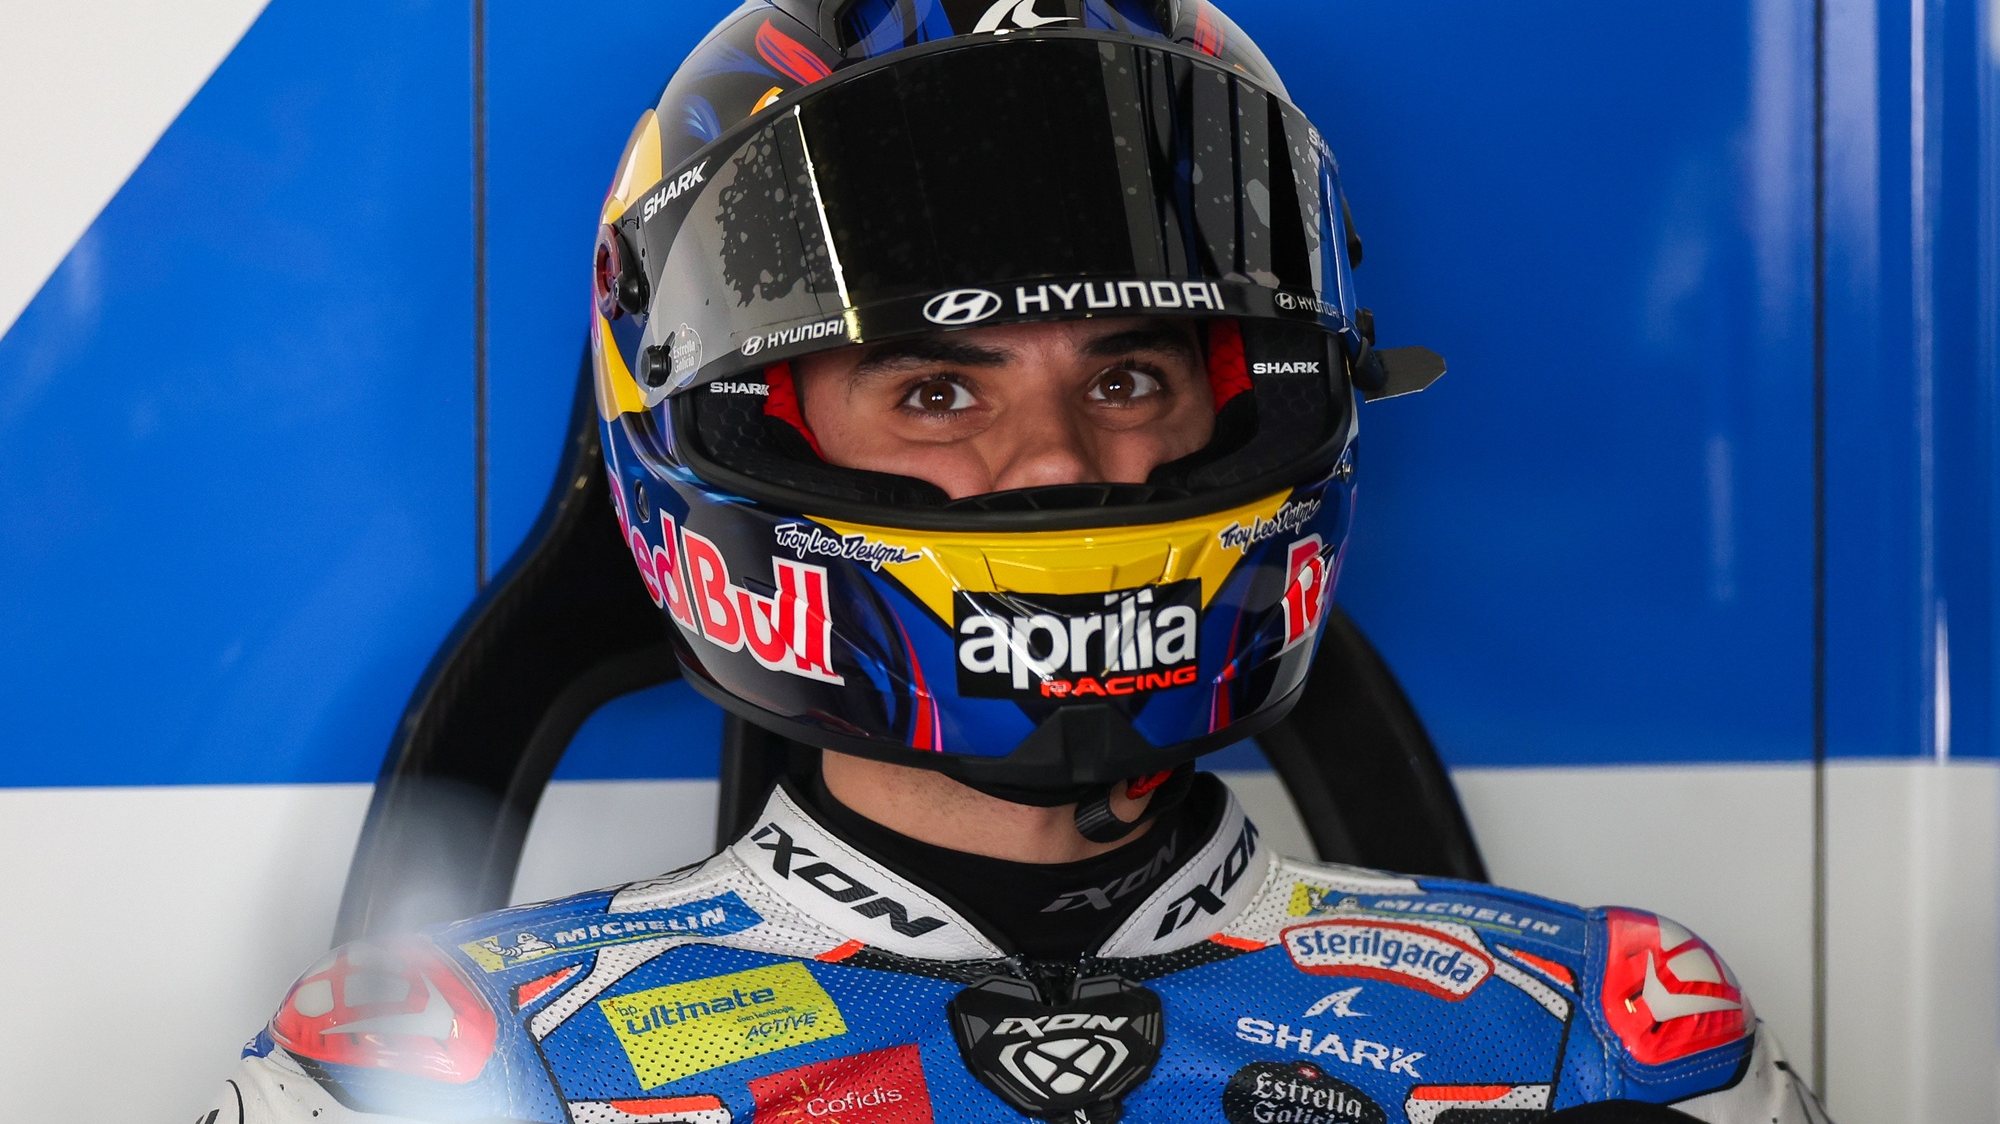 Miguel Oliveira of Portugal and Trackhouse Racing gets ready for the qualifying session of the Motorcycling Grand Prix of Portugal, in Portimao, Portugal, 23 March 2024. The 2024 Motorcycling Grand Prix of Portugal is held on 24 March. JOSE SENA GOULAO/LUSA